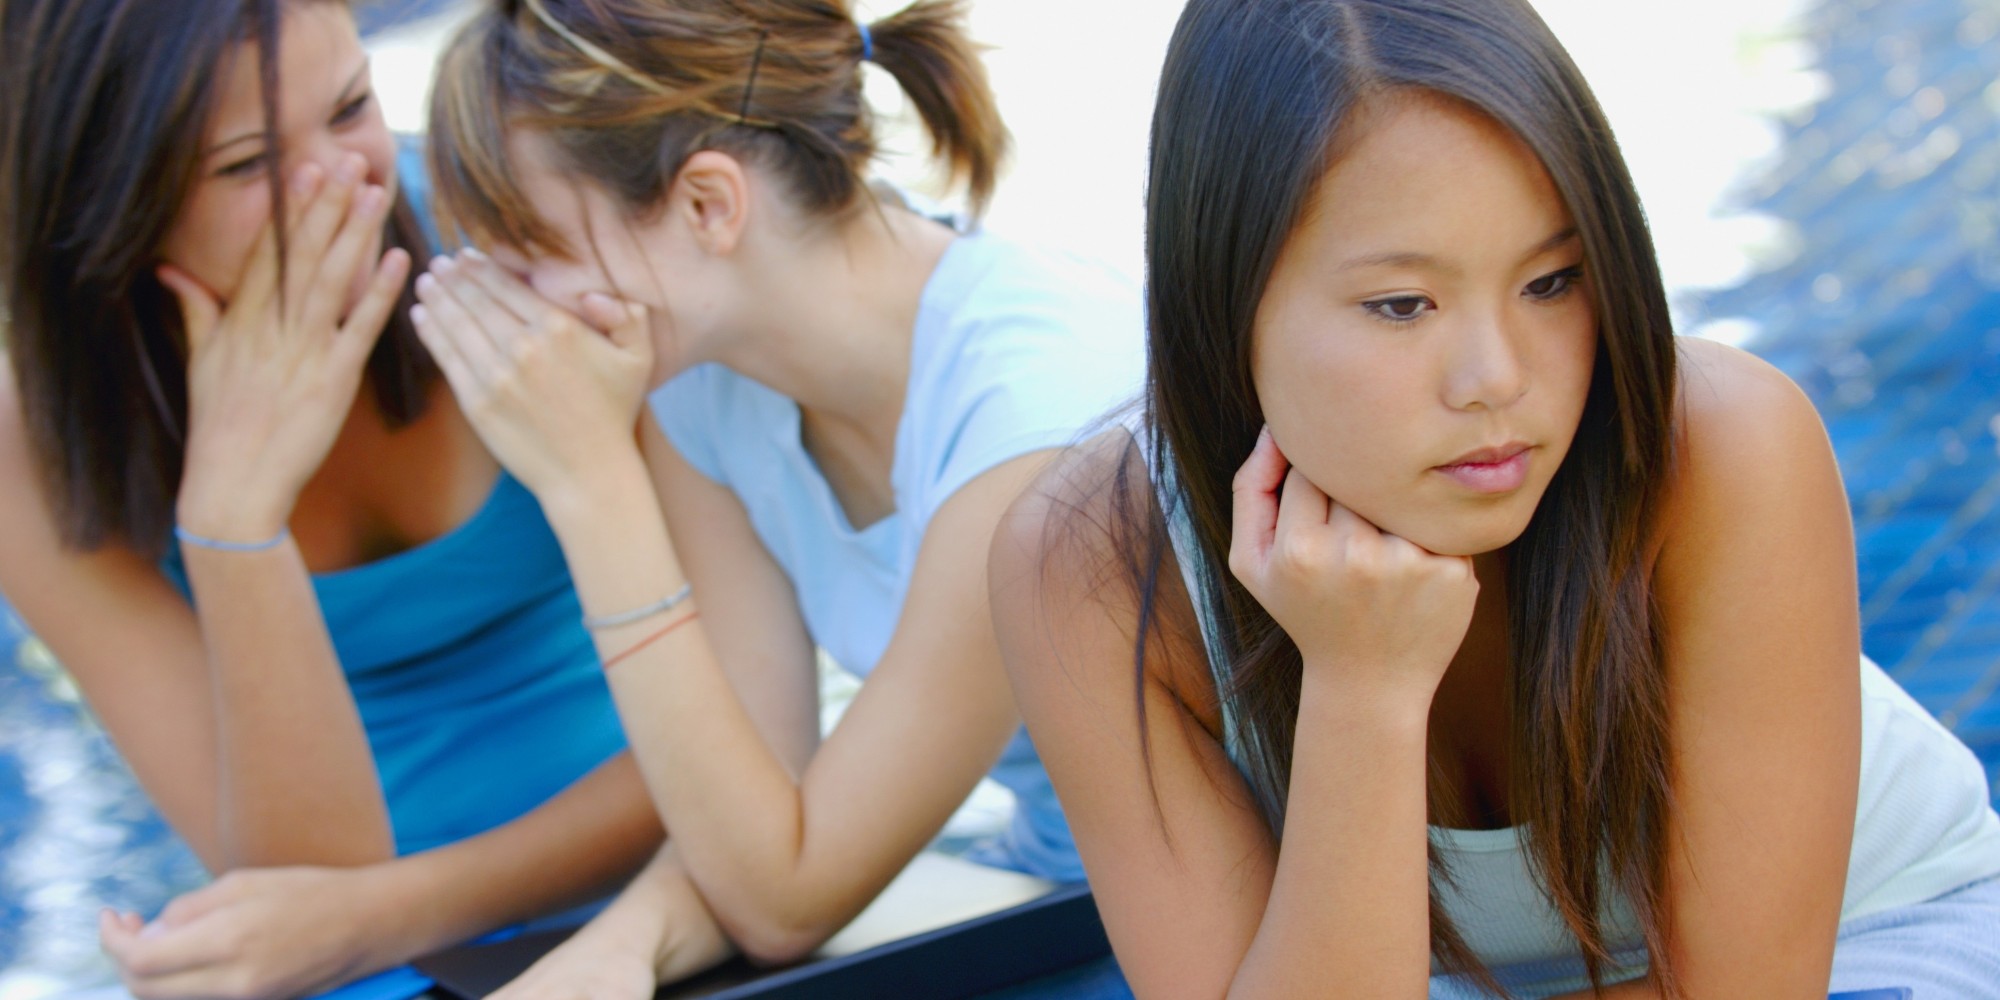 Sexually Active Teen Girls More Likely To Be Bullied Than Similar Boys 3366